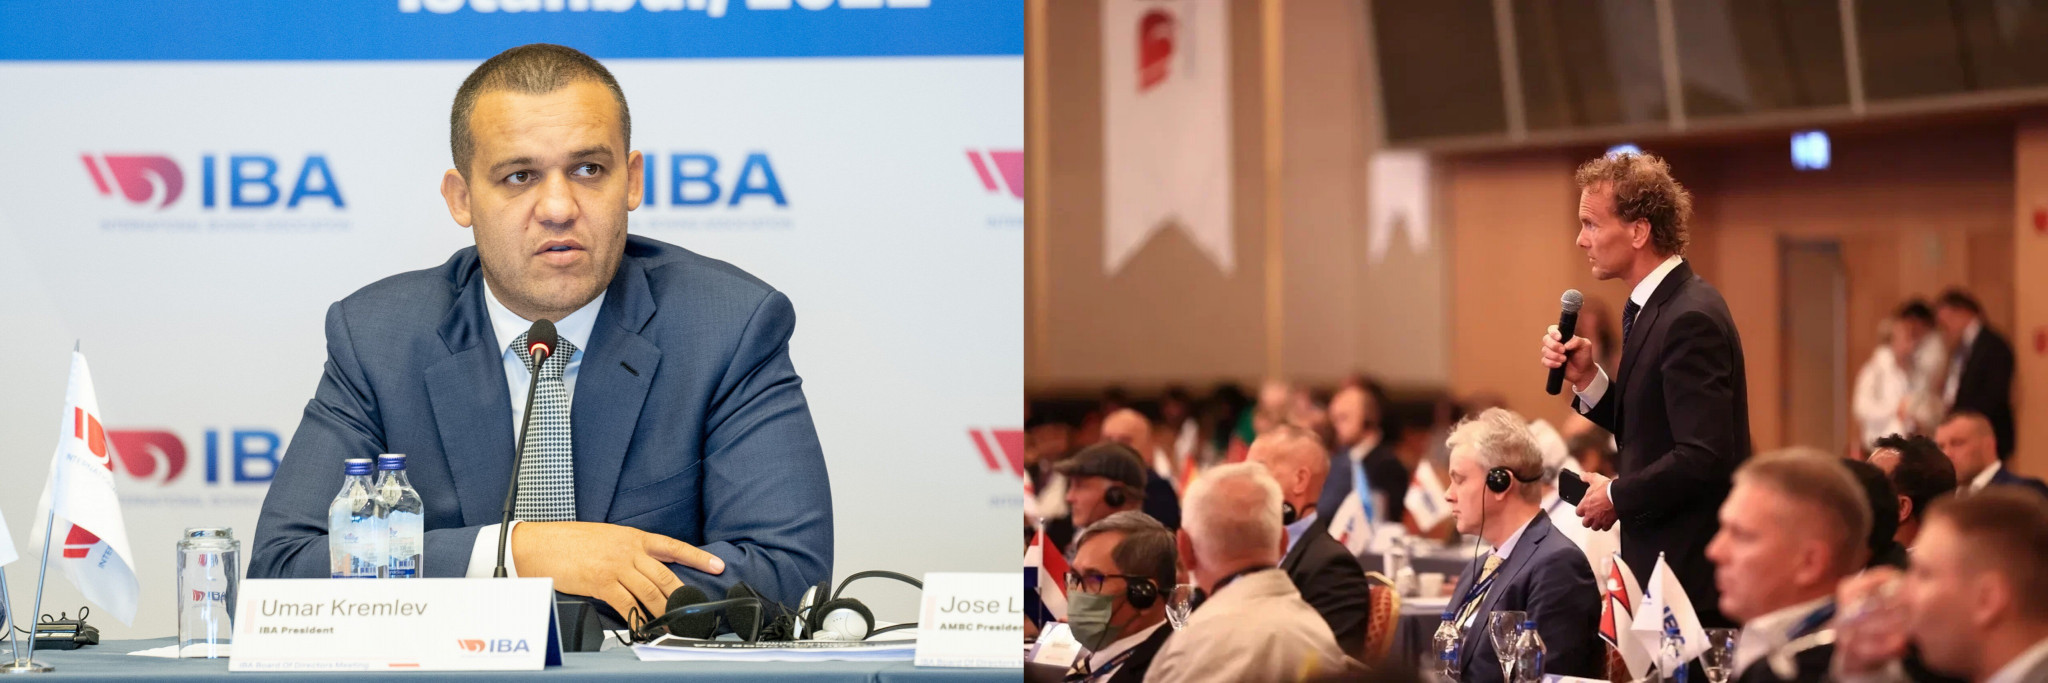 IBA set for crucial Extraordinary Congress with potential Presidential election re-run